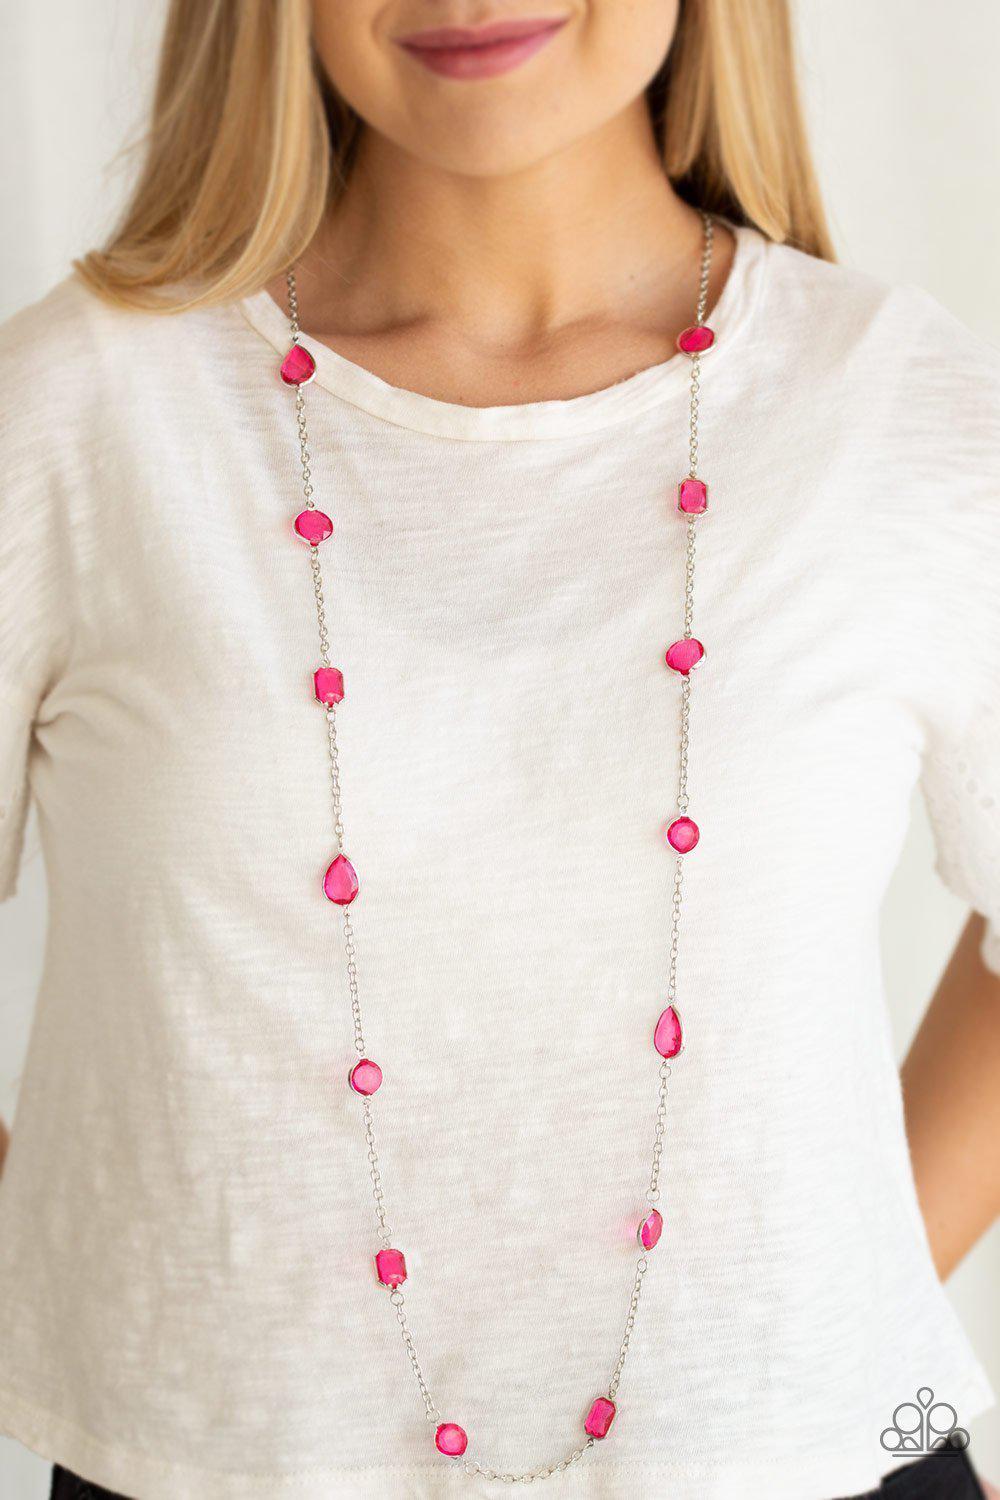 Glassy Glamorous Pink and Silver Necklace - Paparazzi Accessories - model -CarasShop.com - $5 Jewelry by Cara Jewels